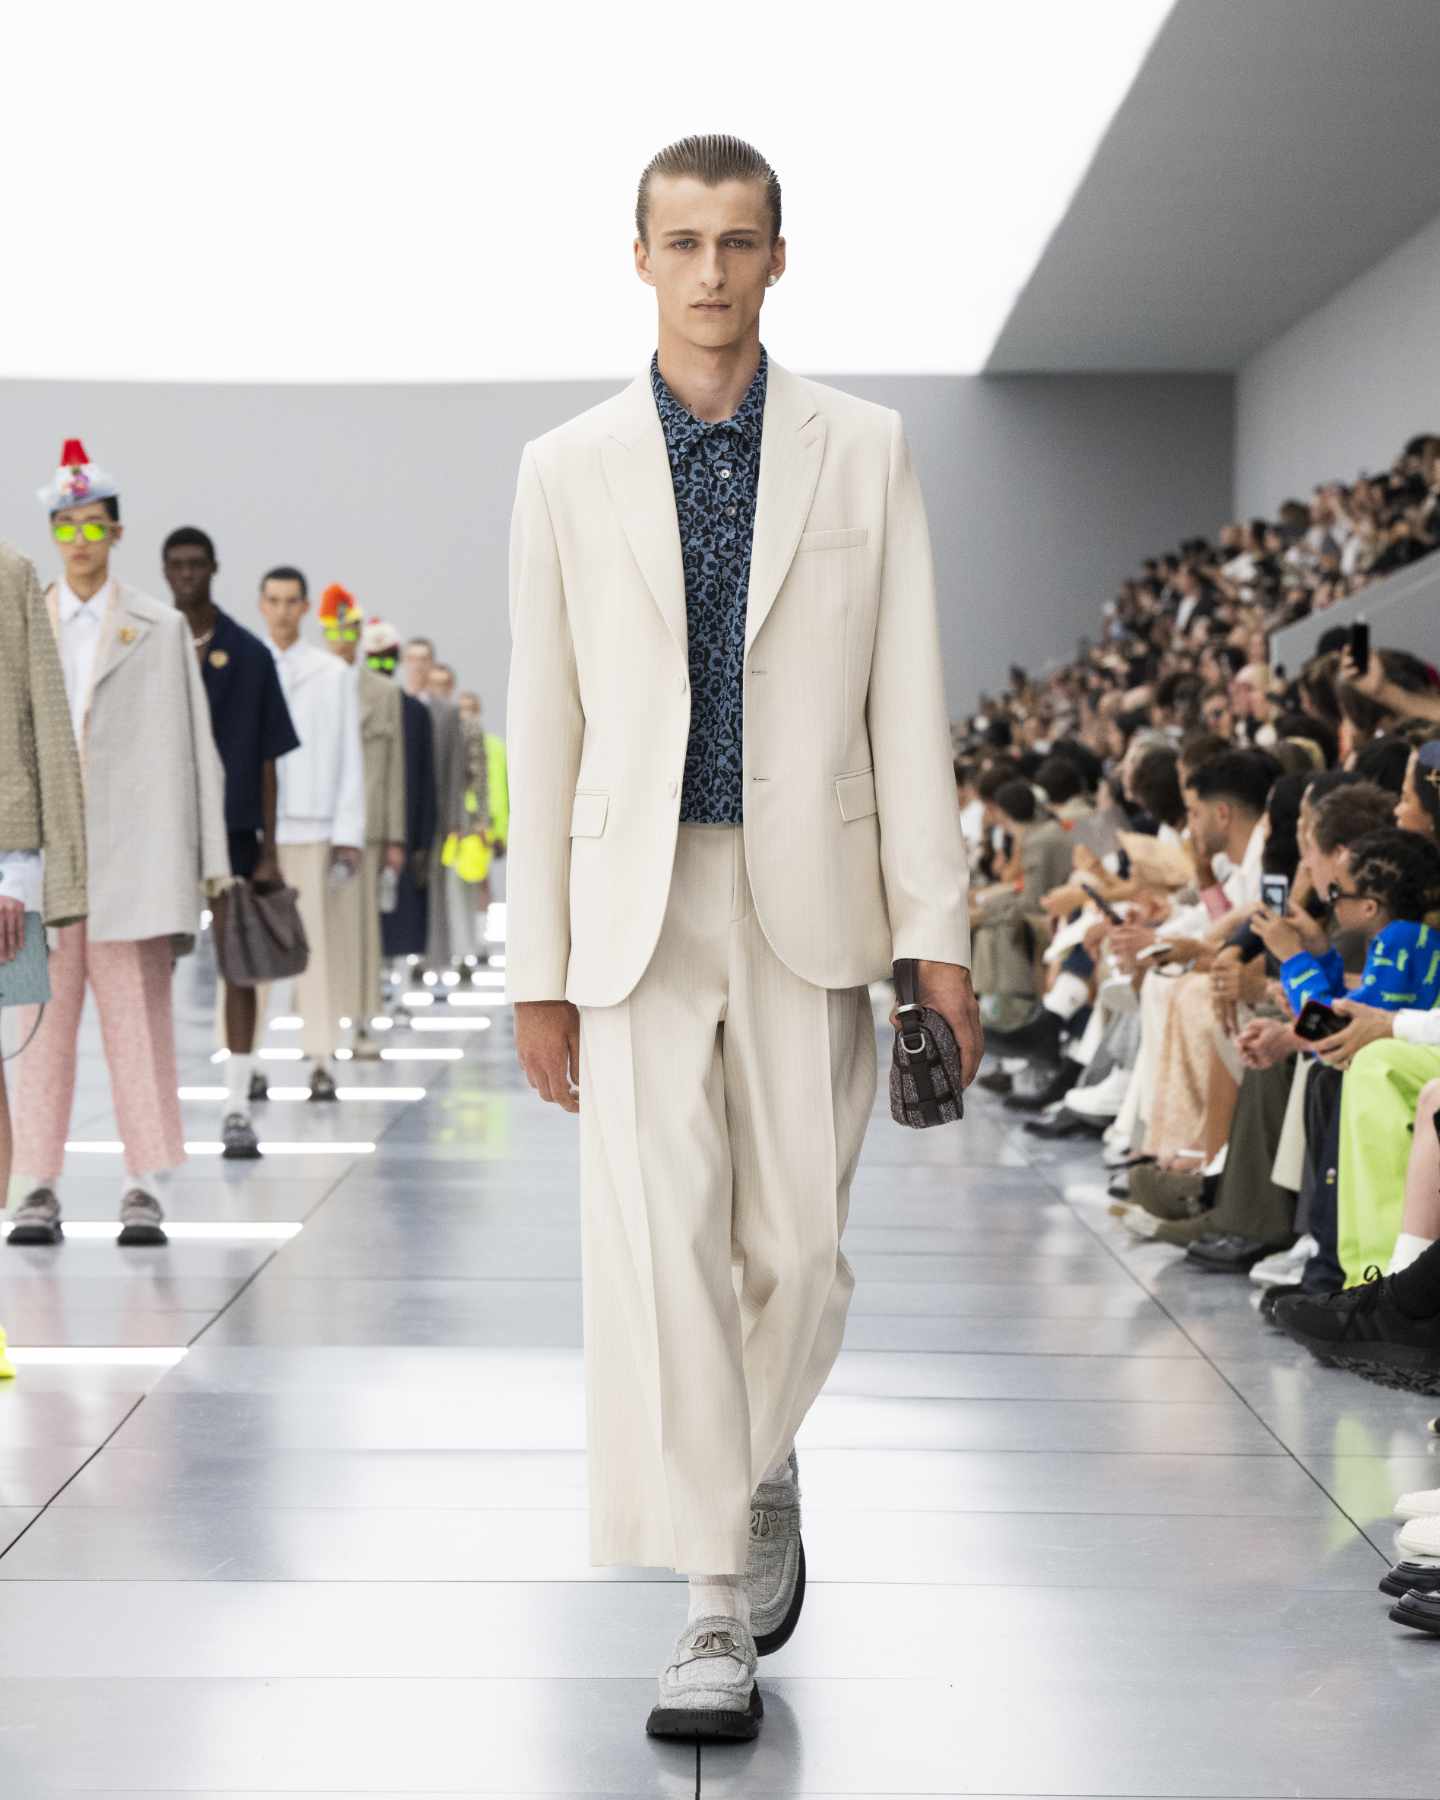 Trap Doors & Giant Hats at Dior's SS24 Menswear Collection